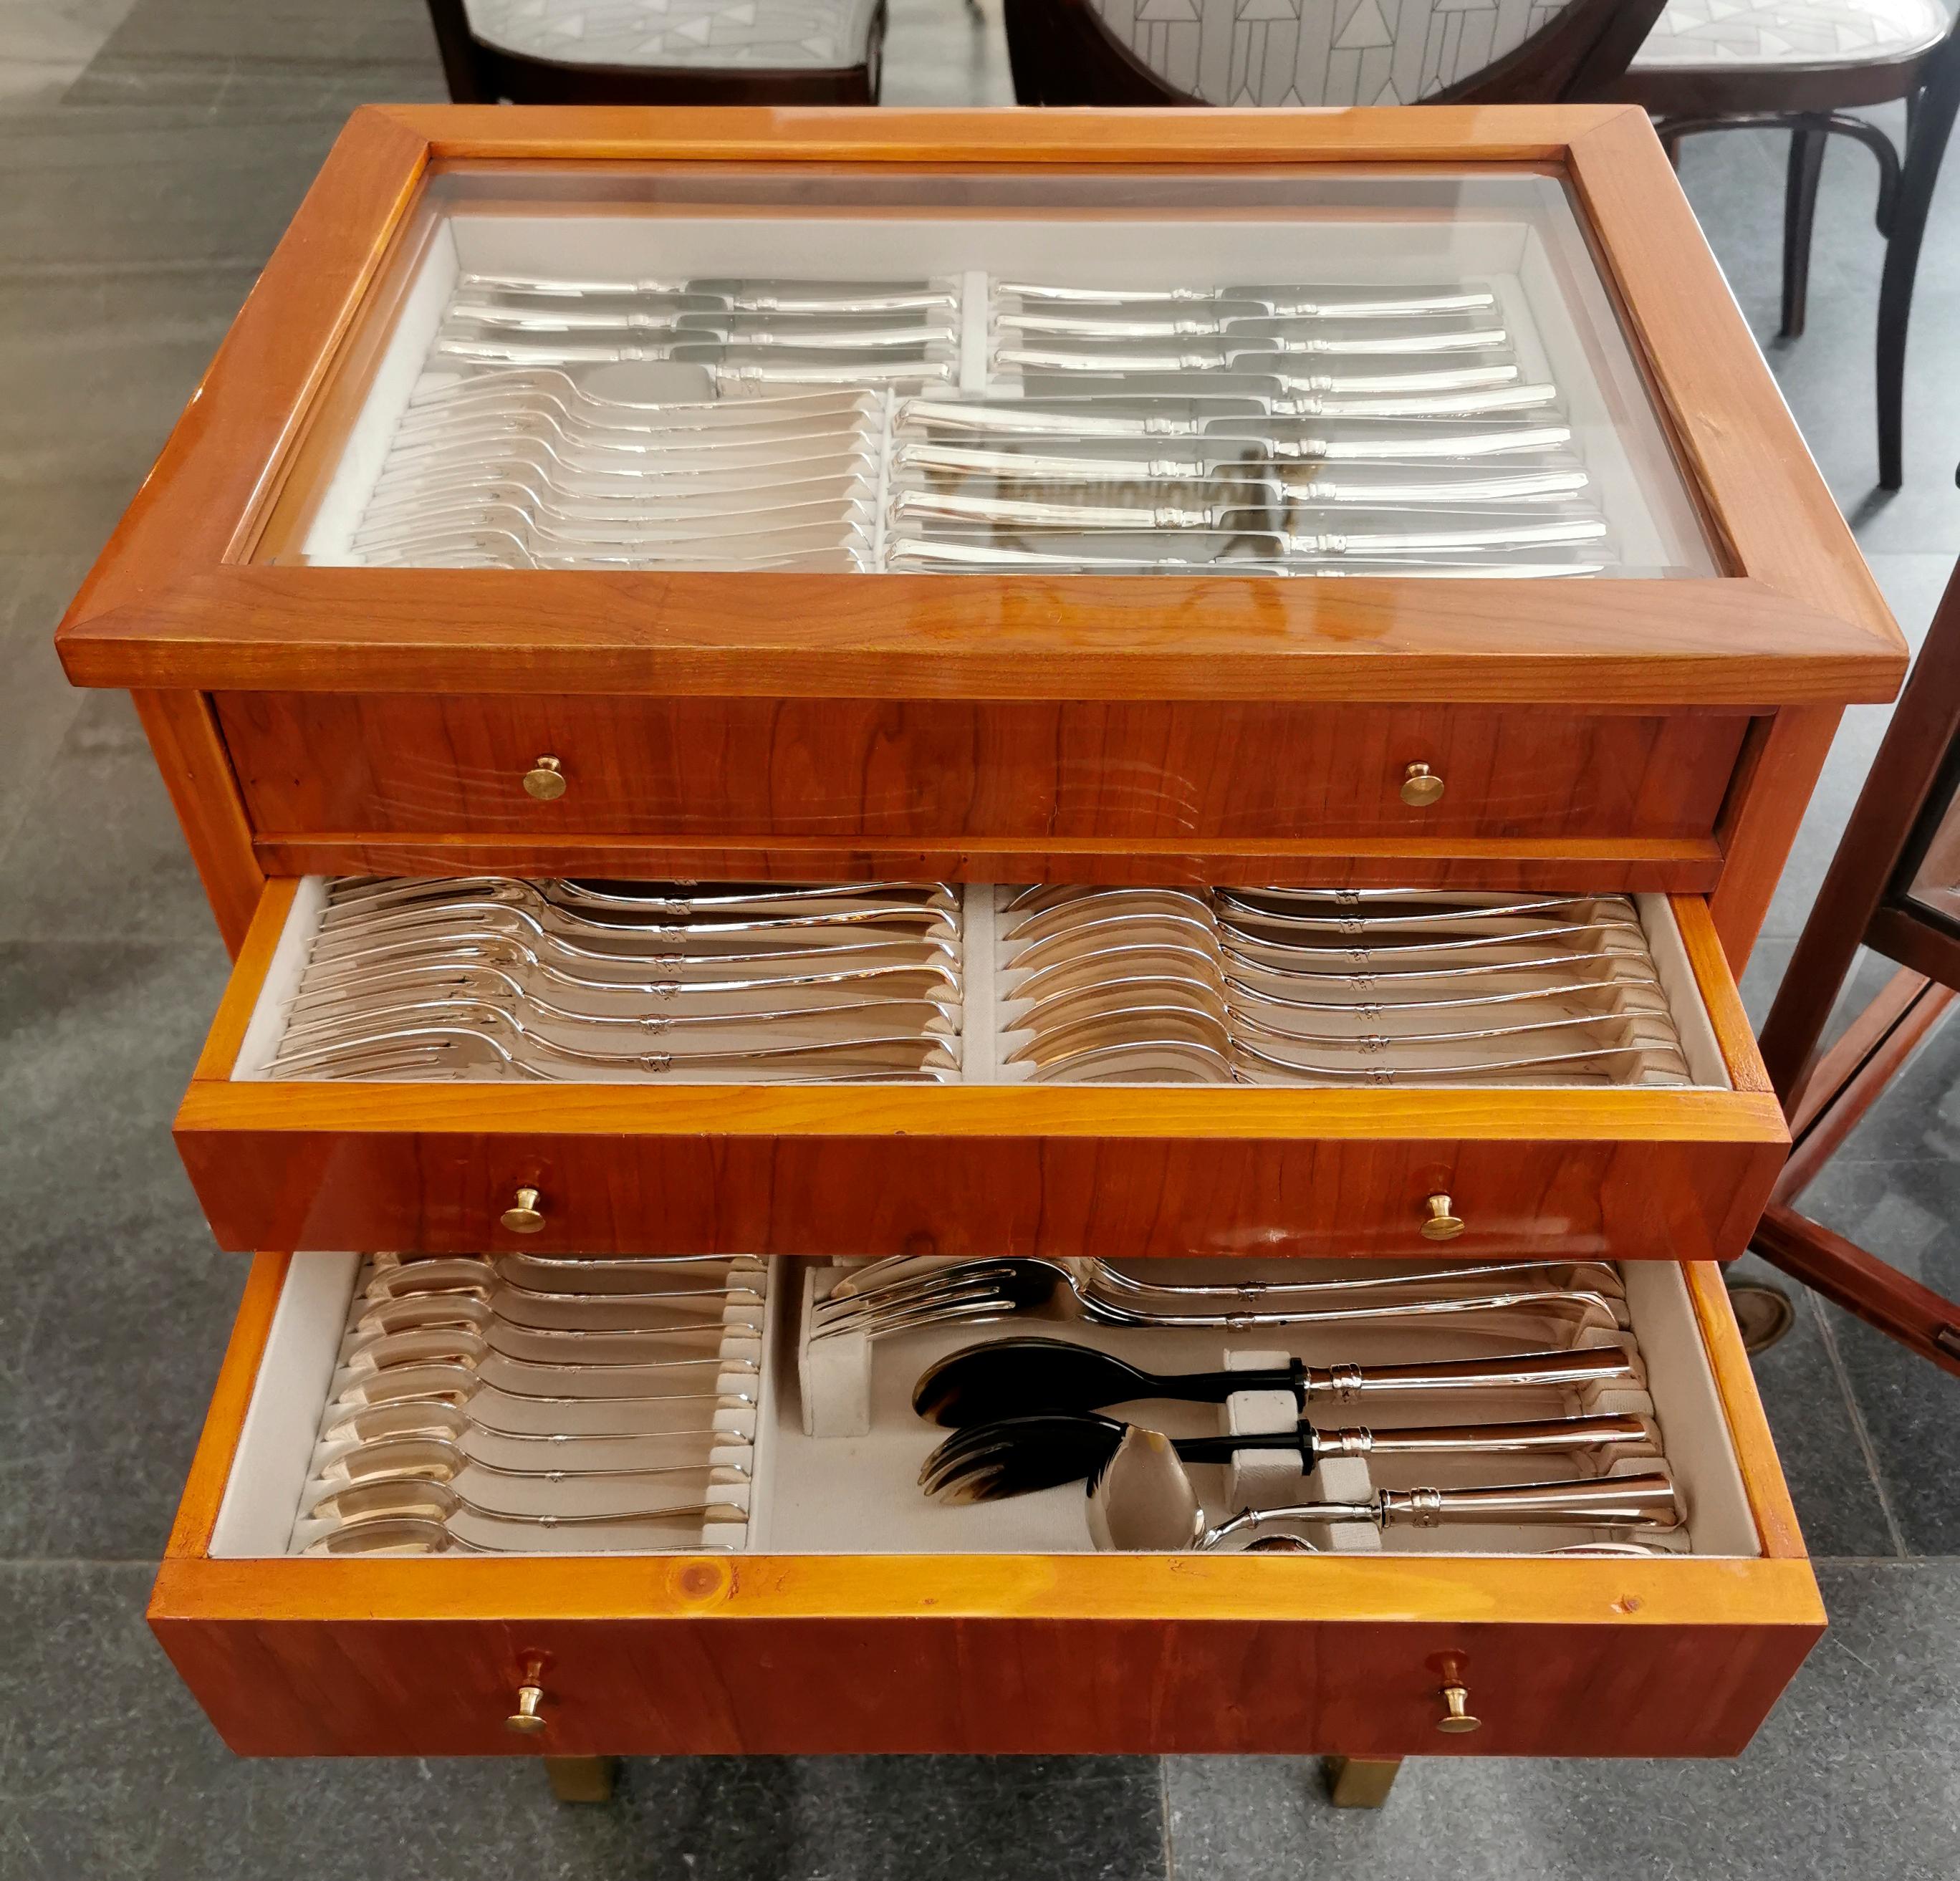 Hand-Crafted Art Nouveau Silver Cutlery Set for 12 People in Showcase VSF Duesseldorf Germany